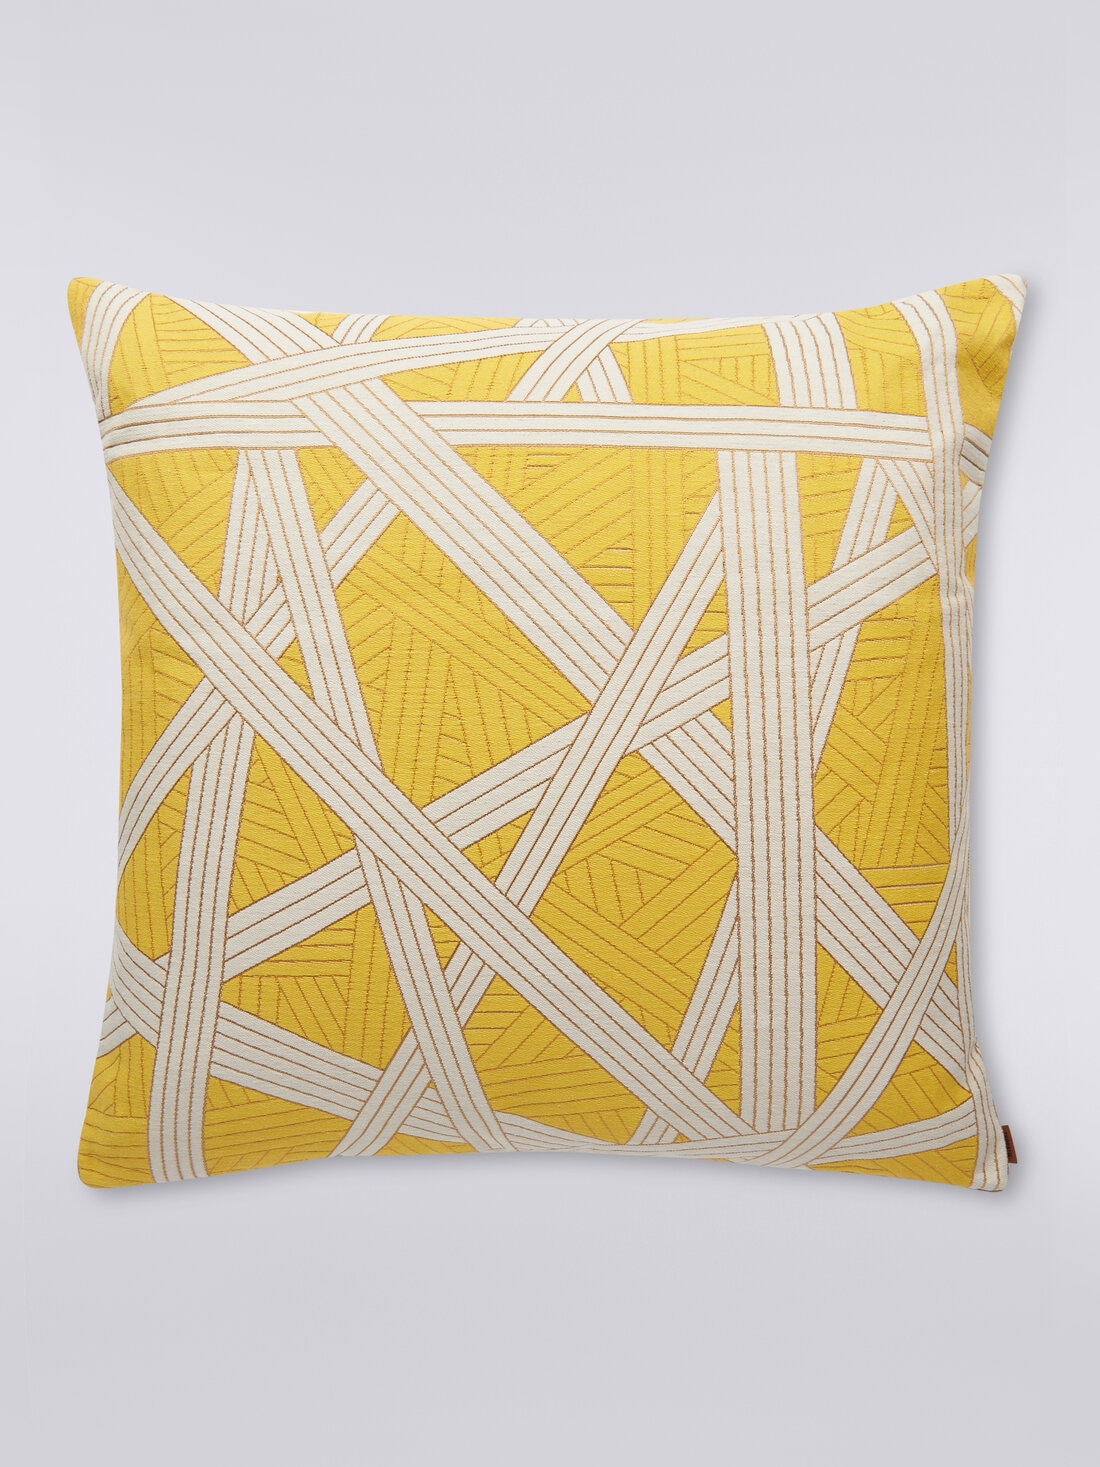 Nastri cushion 60x60 cm with contrasting stitching, Yellow  - 8051575837722 - 0